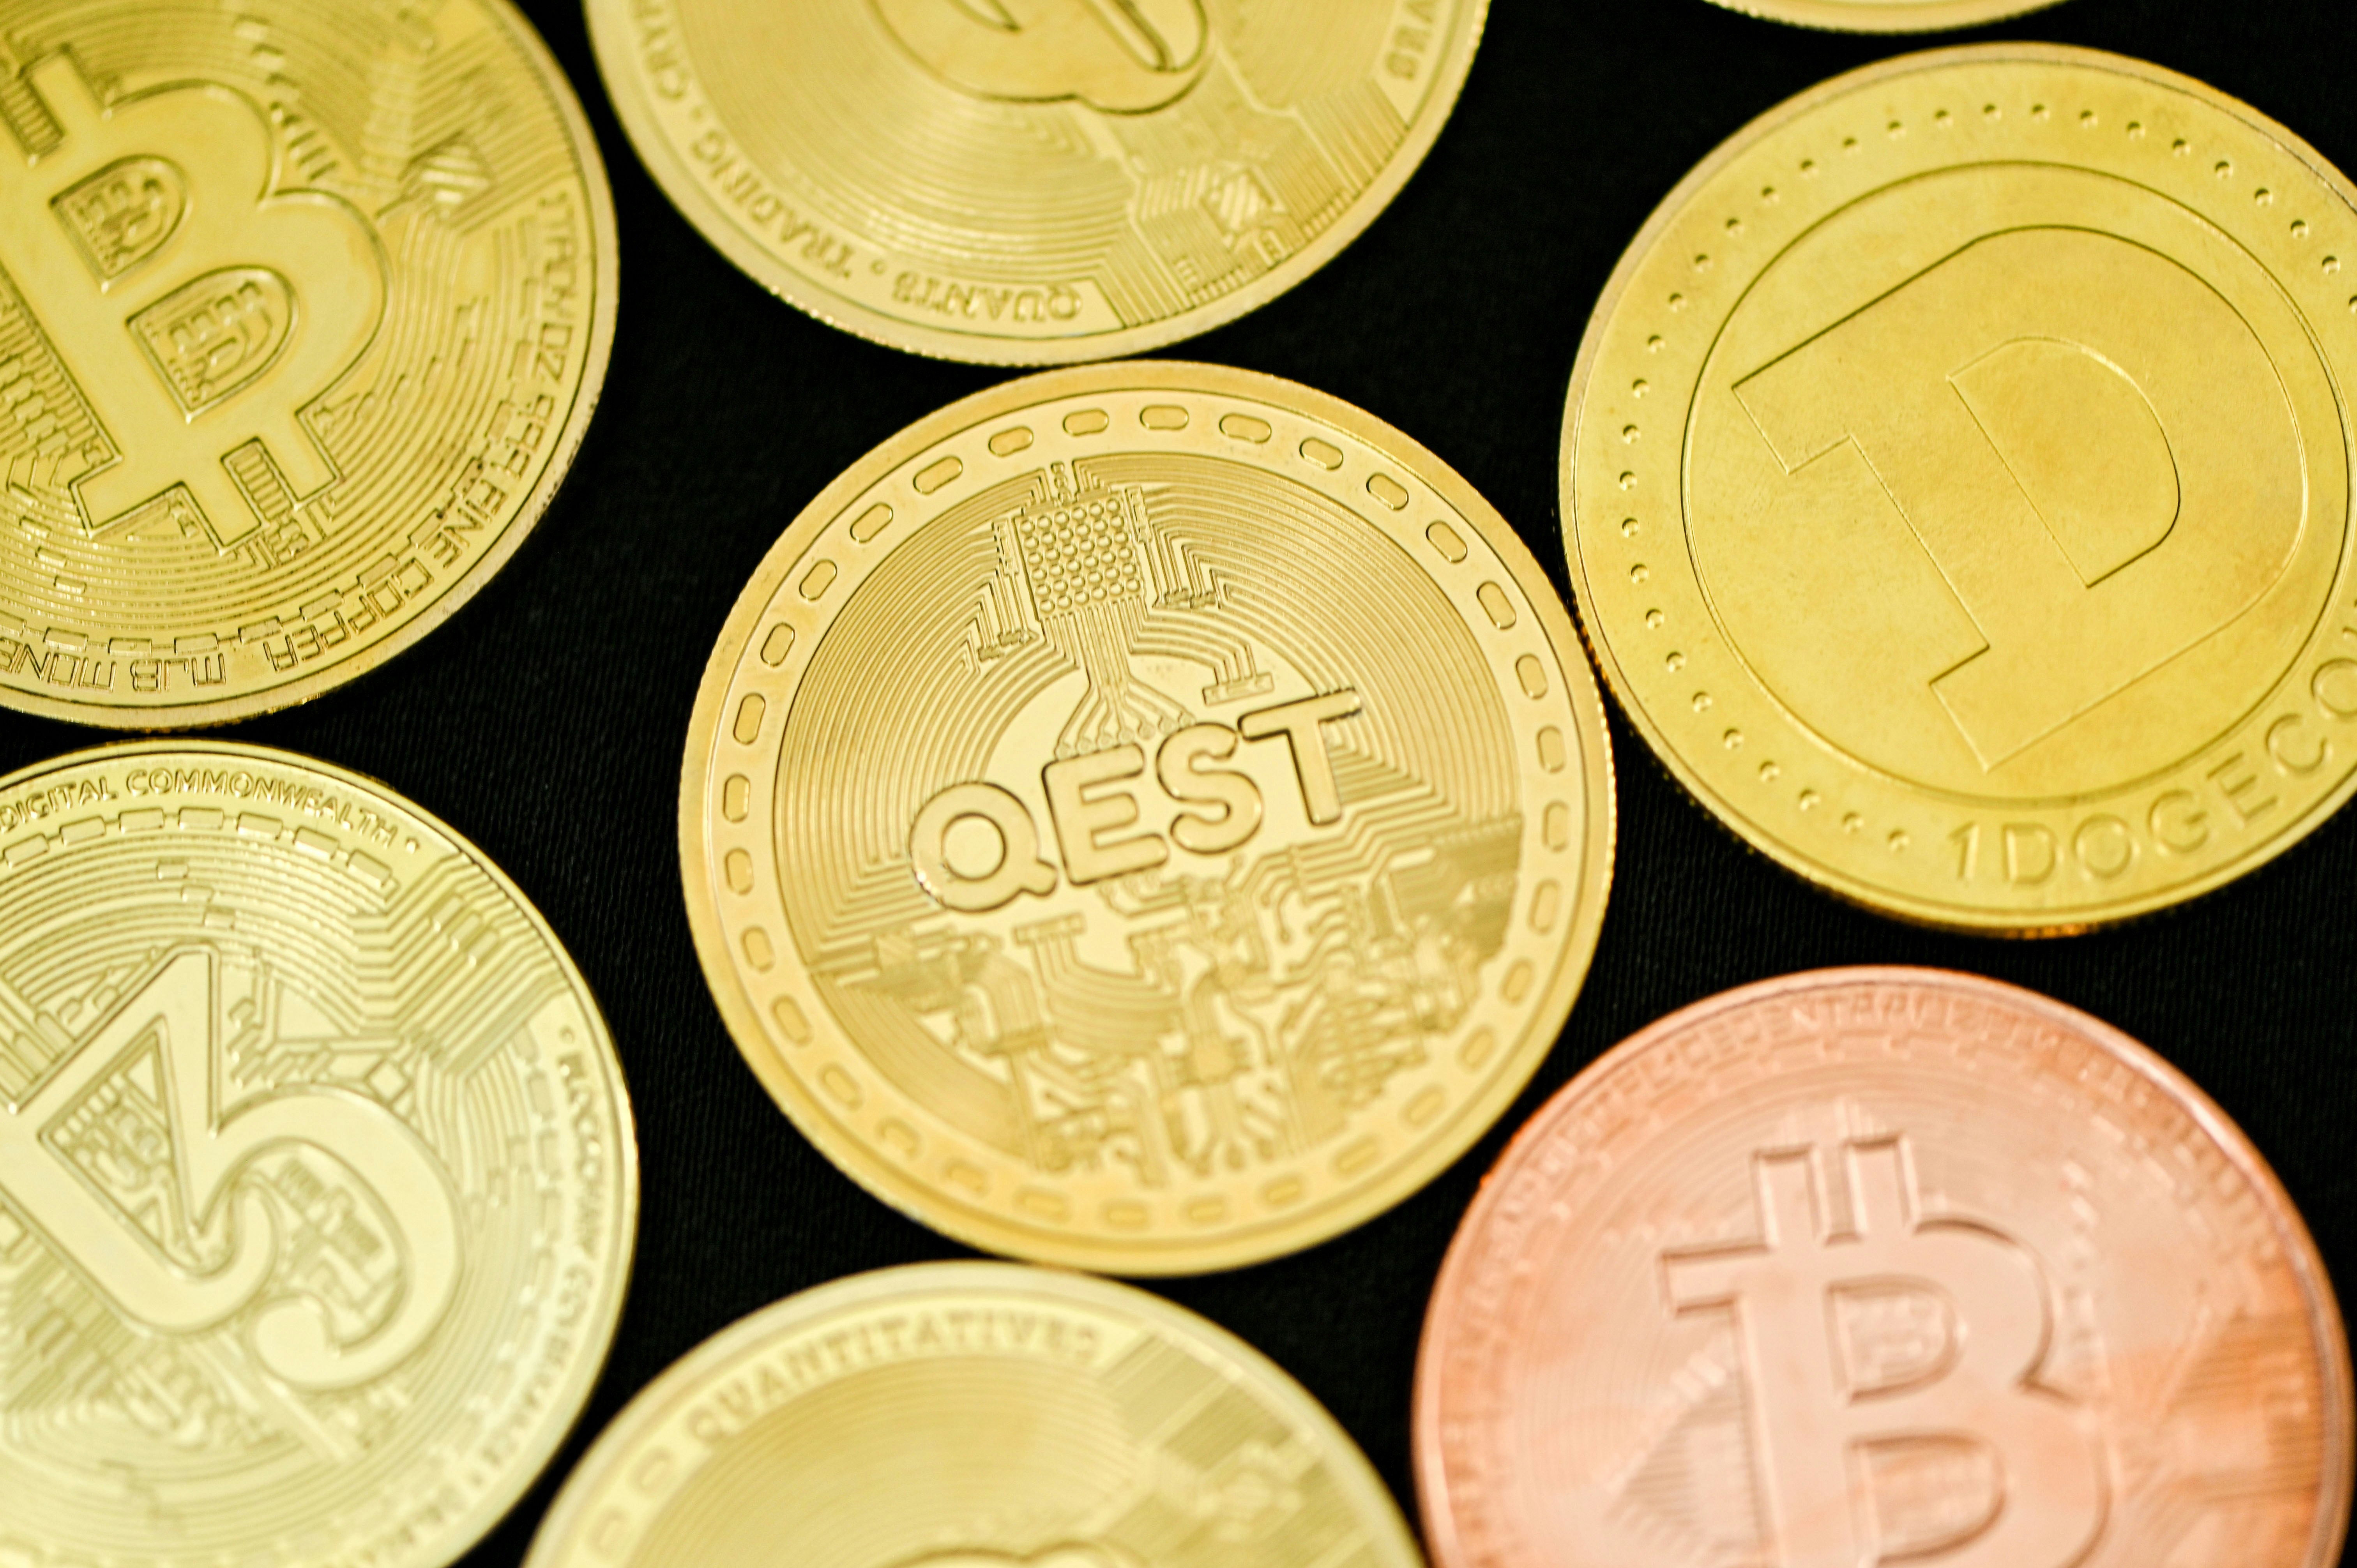 QEST coin surrounded by other cryptocurrency coins